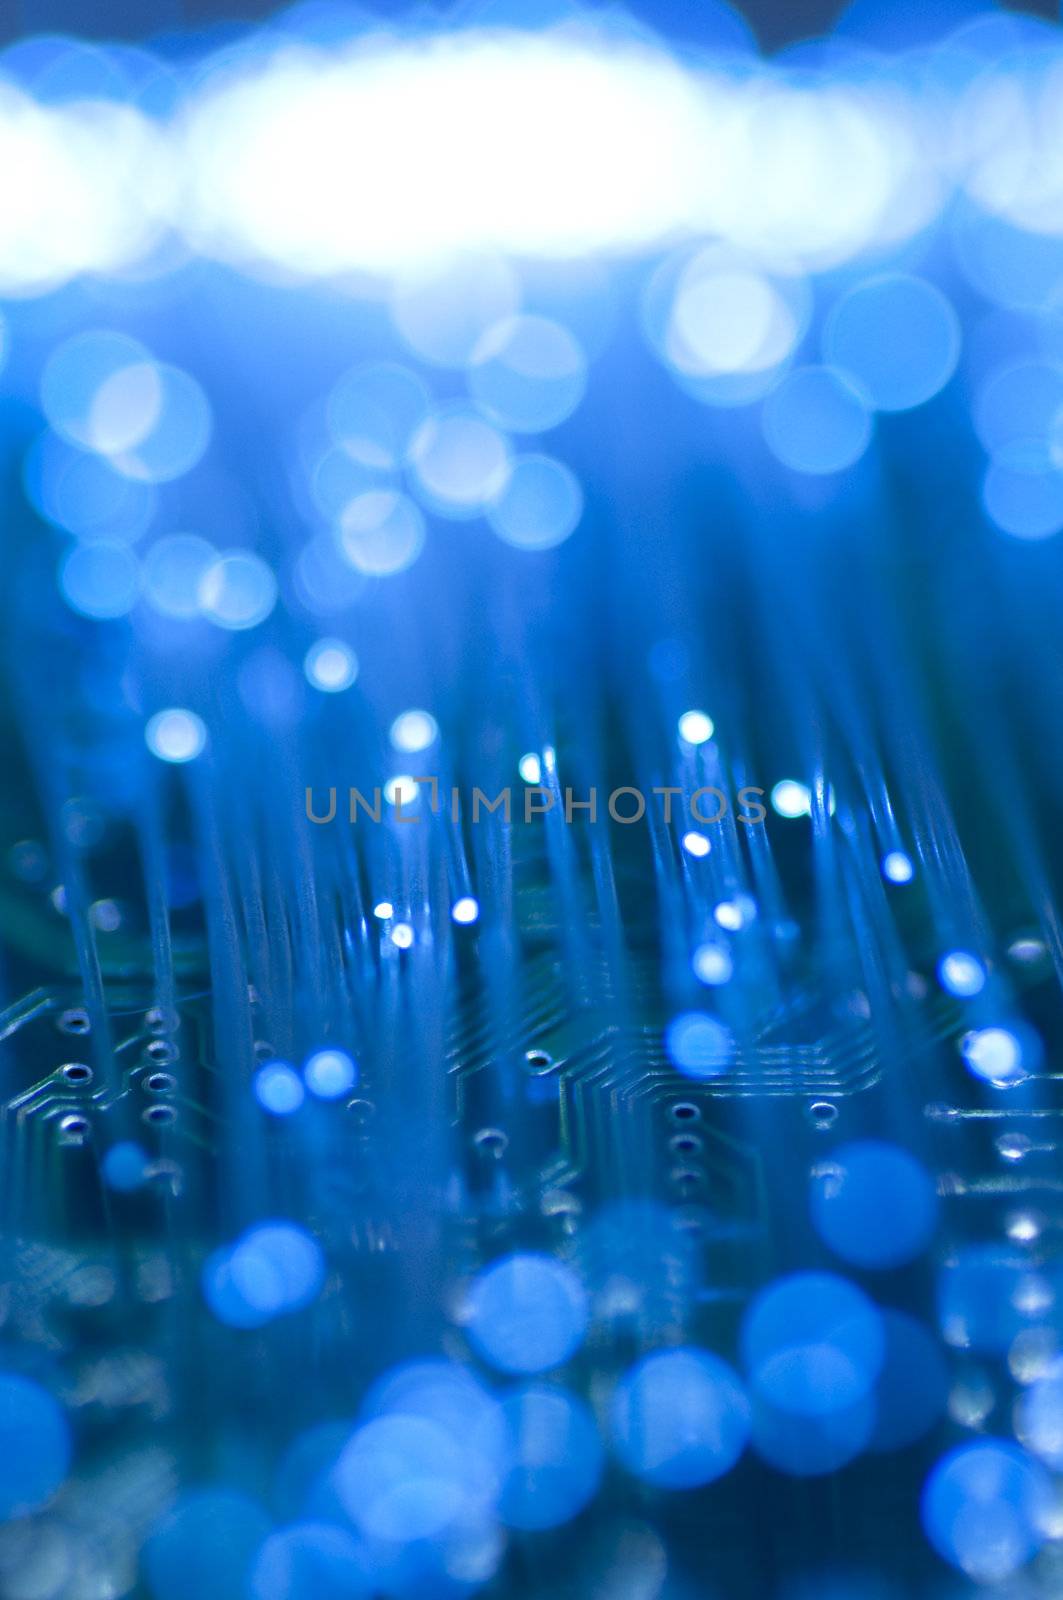 Optical fiber picture with details and light effects. by FernandoCortes